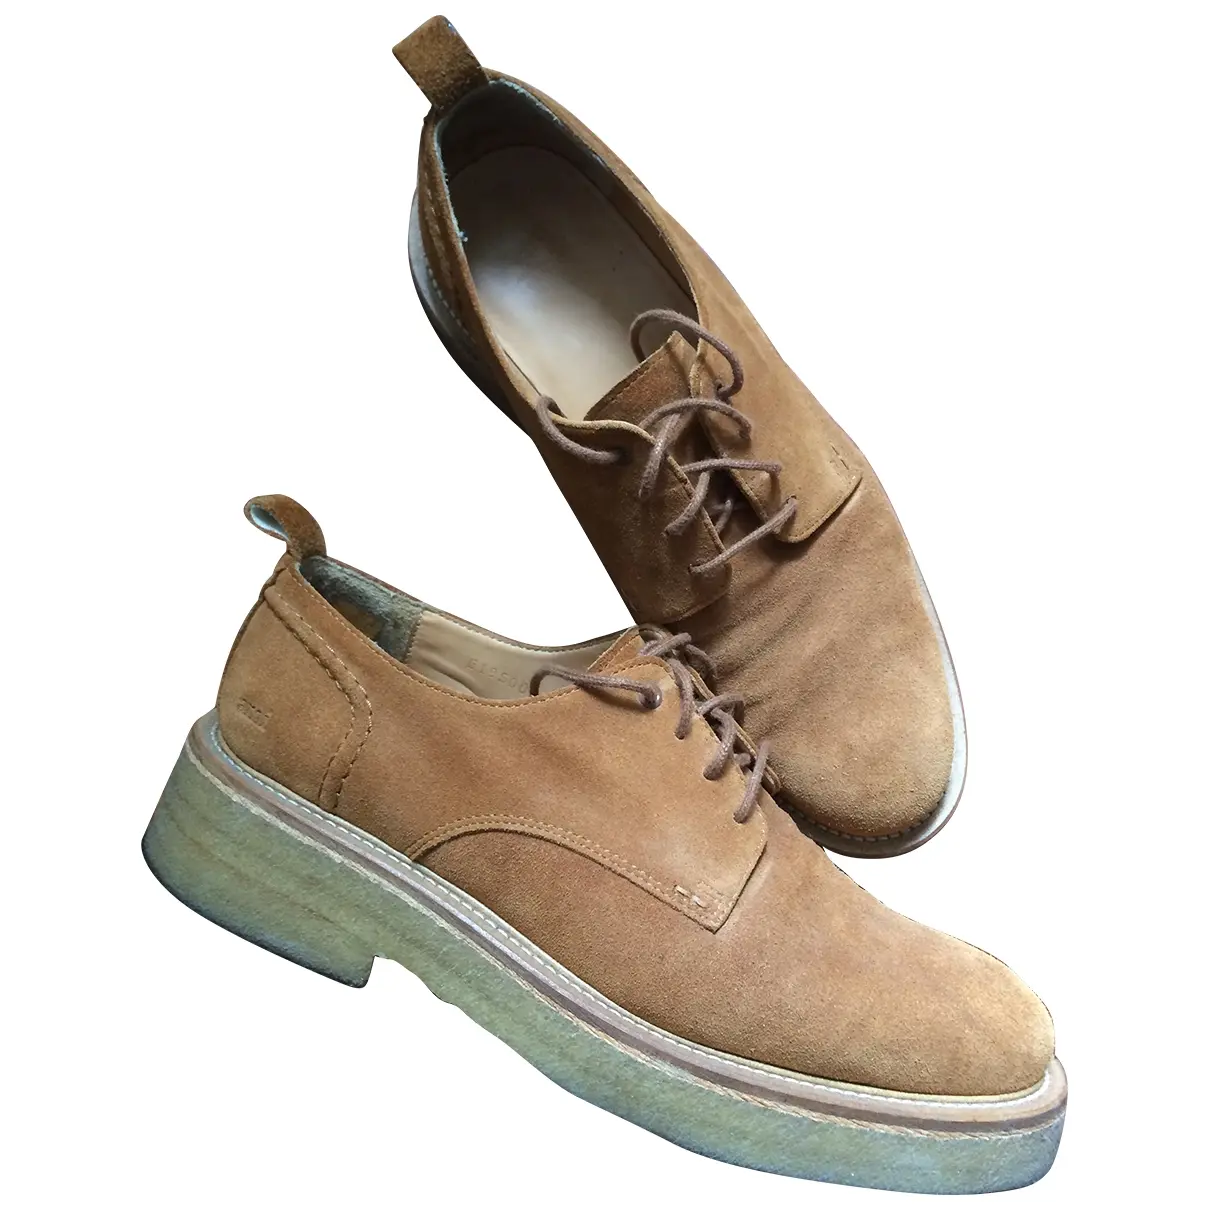 Buy Ami Lace ups online